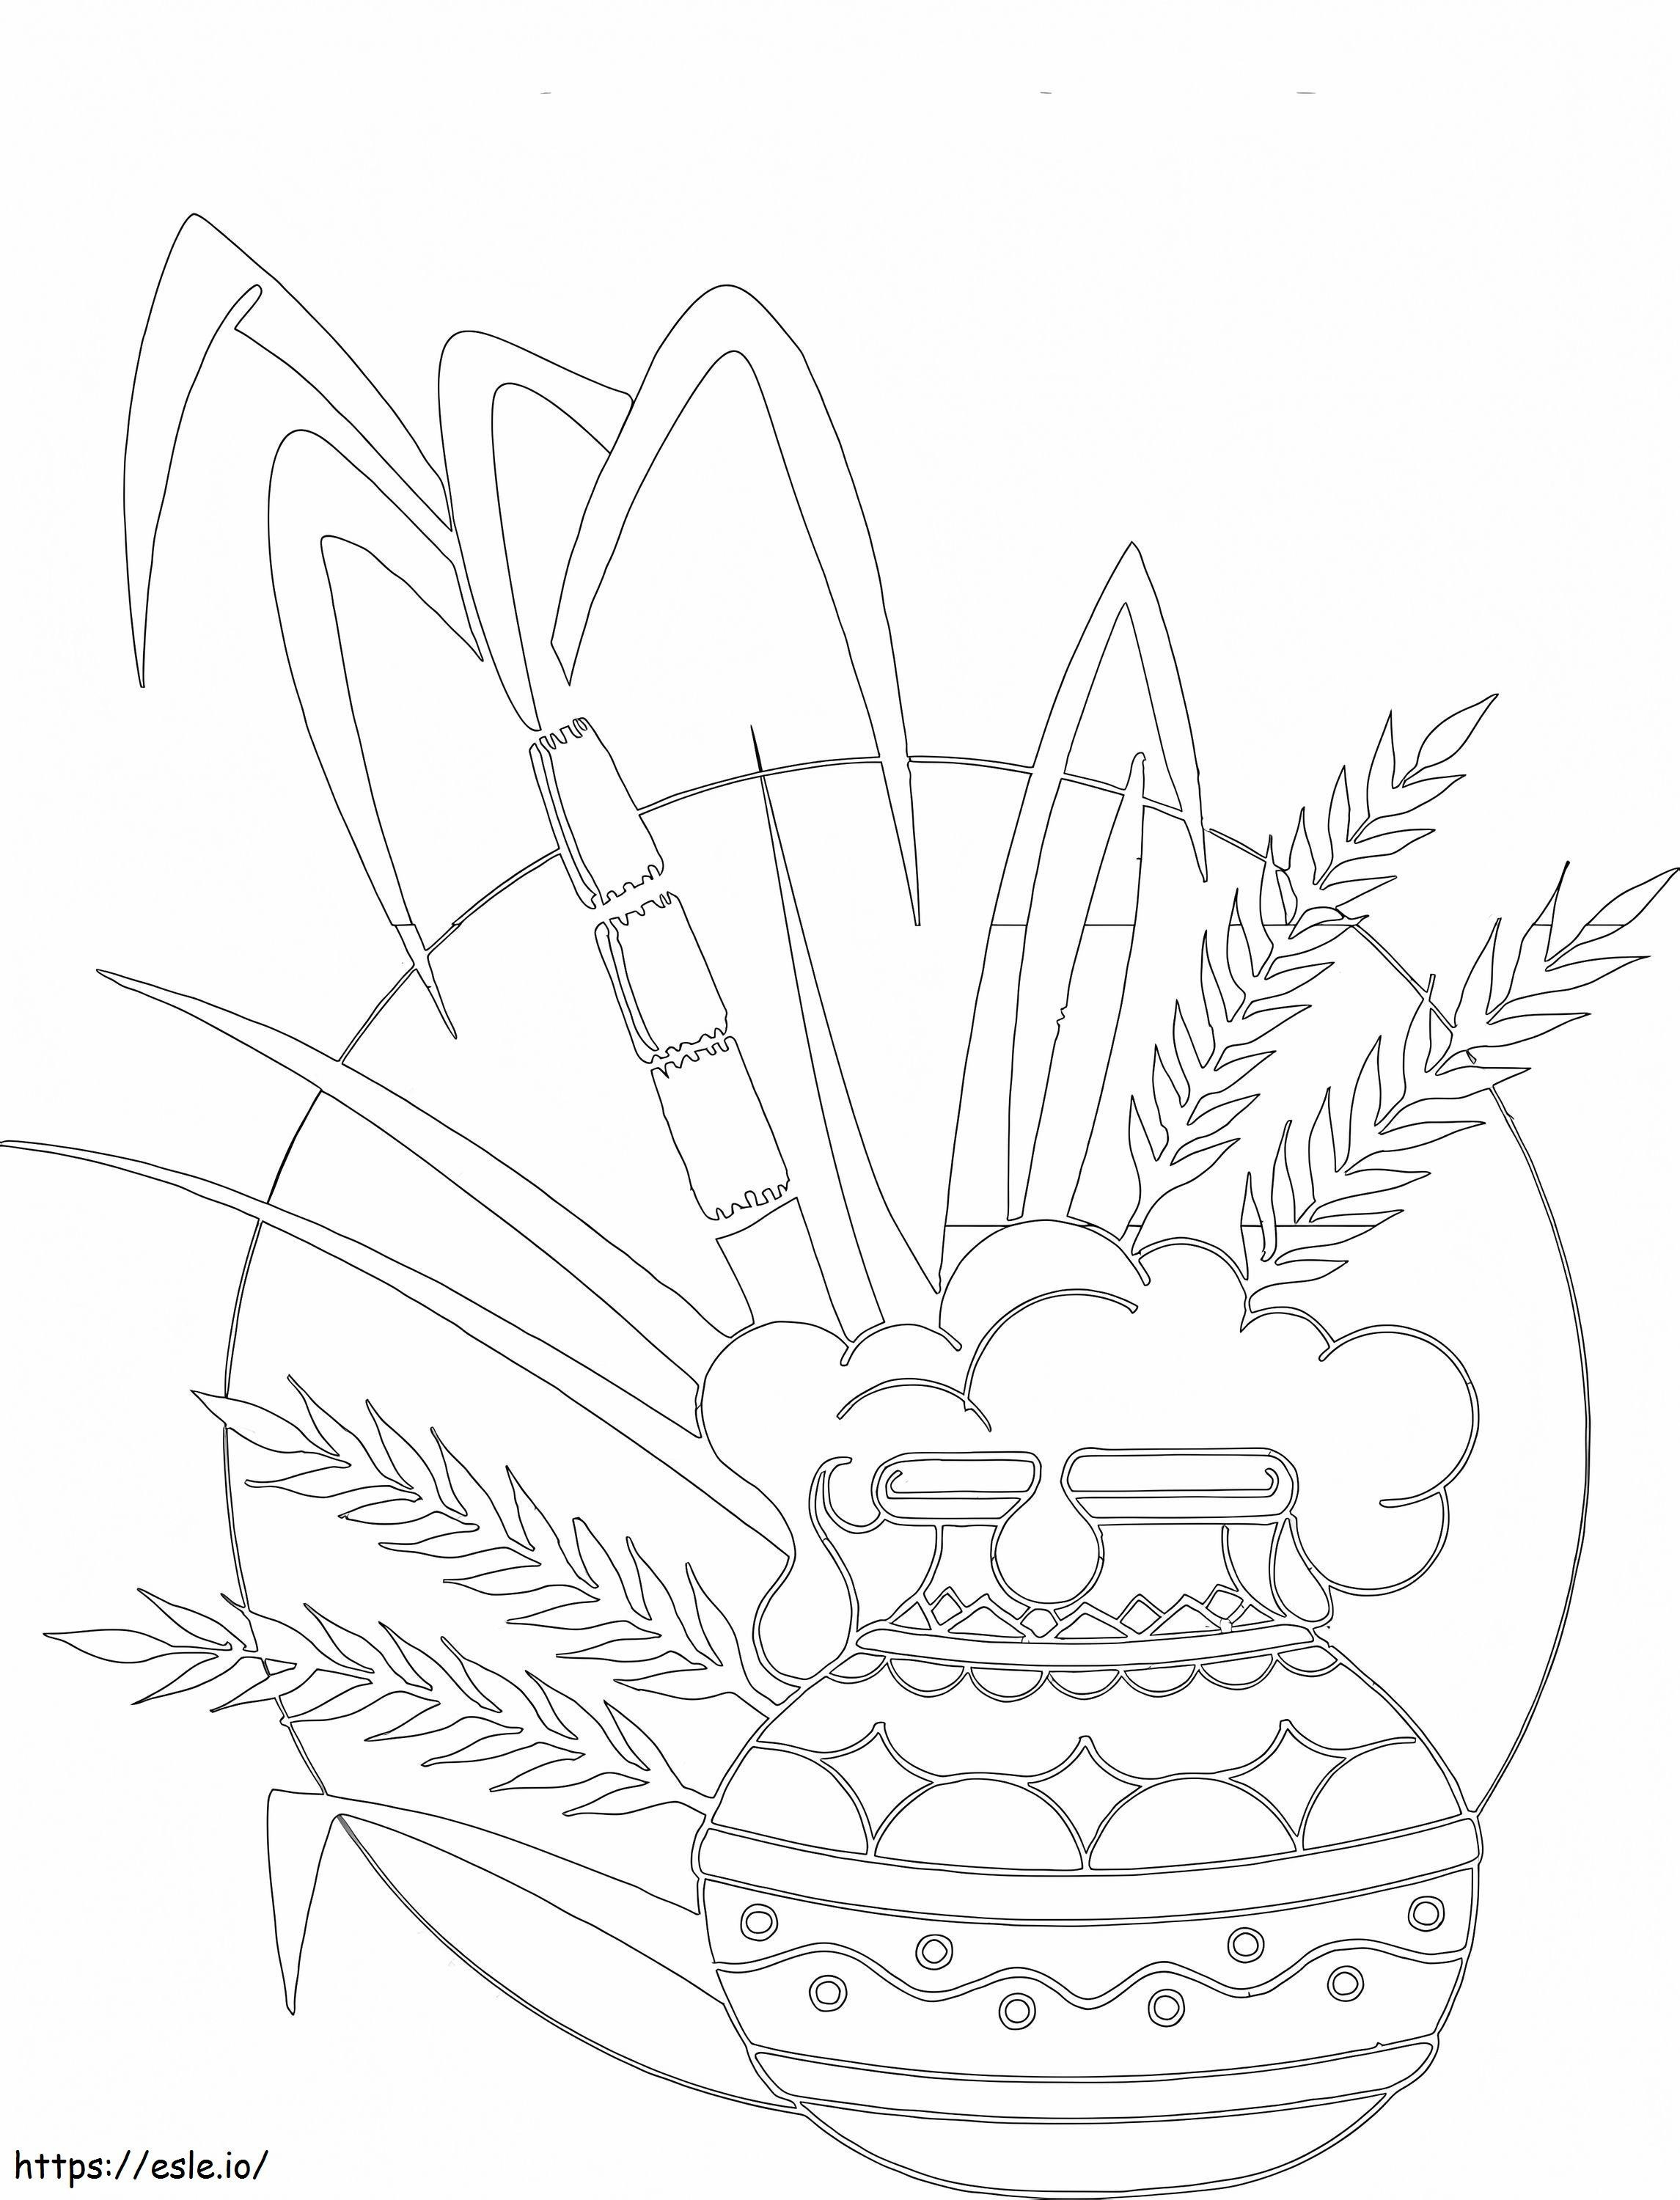 Pongal 1 coloring page